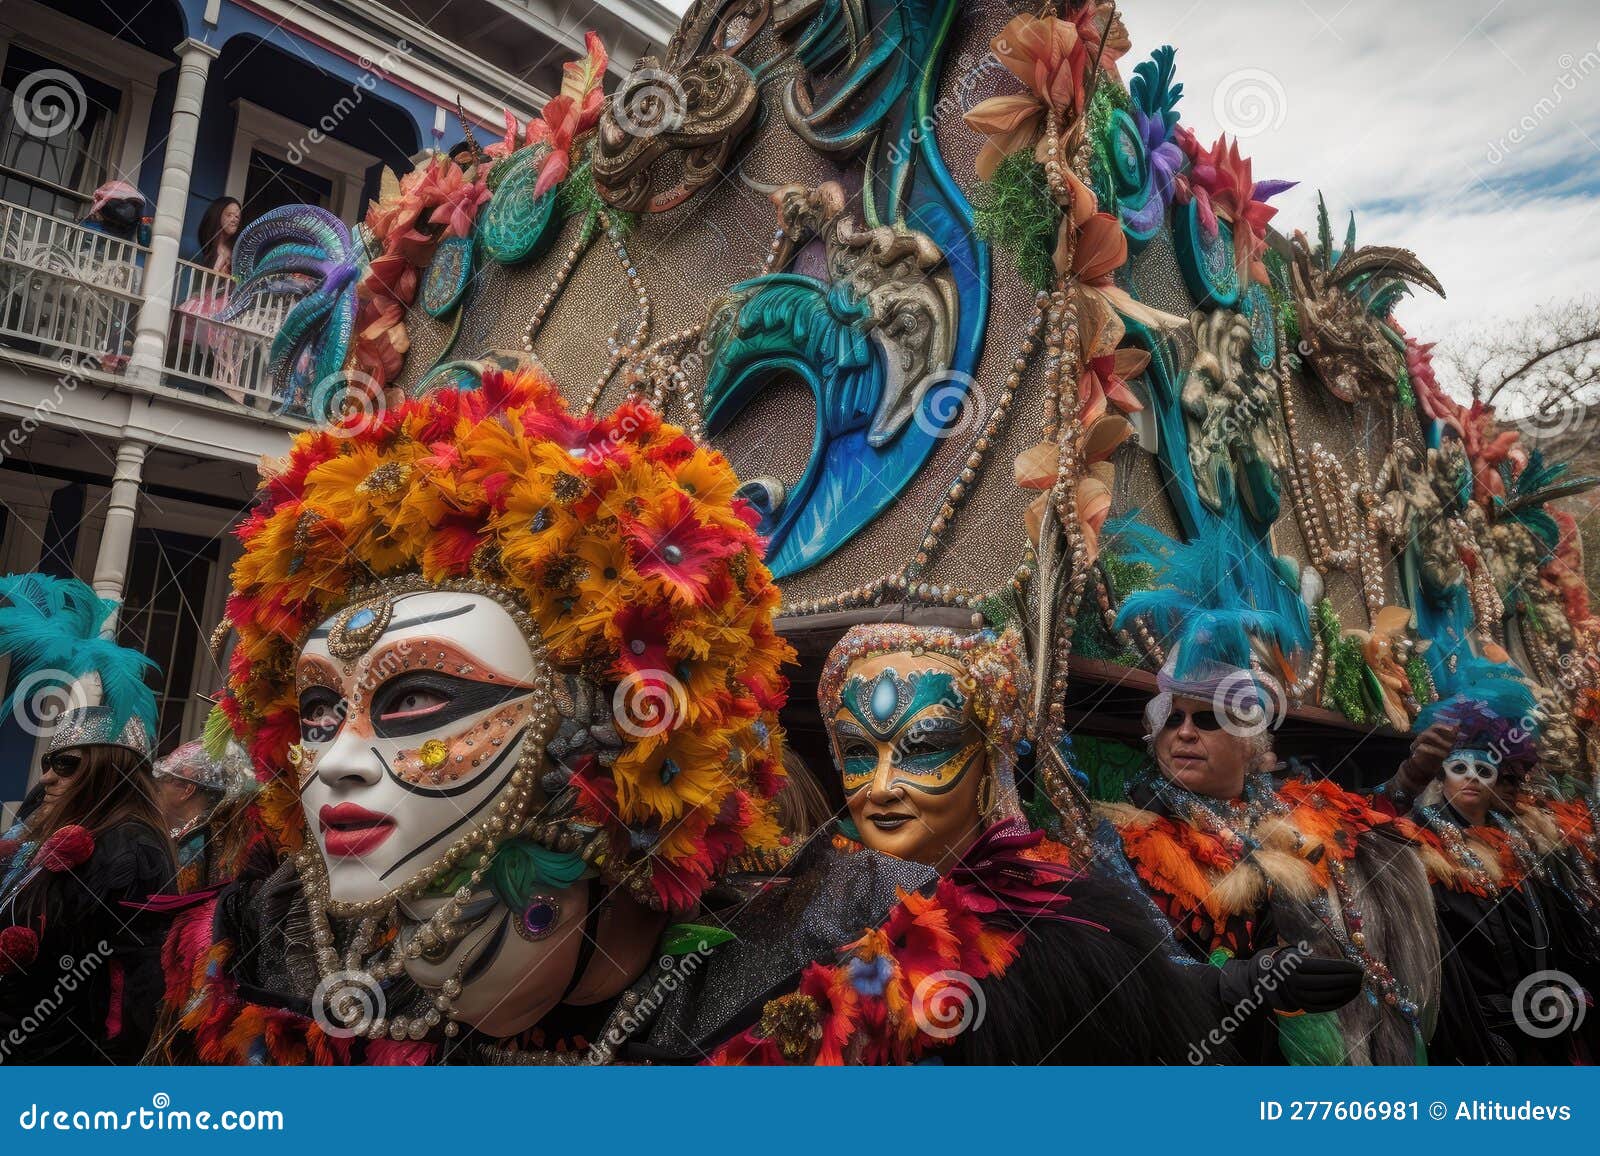 mardi gras parade, with float featuring masked revelers dancing to music